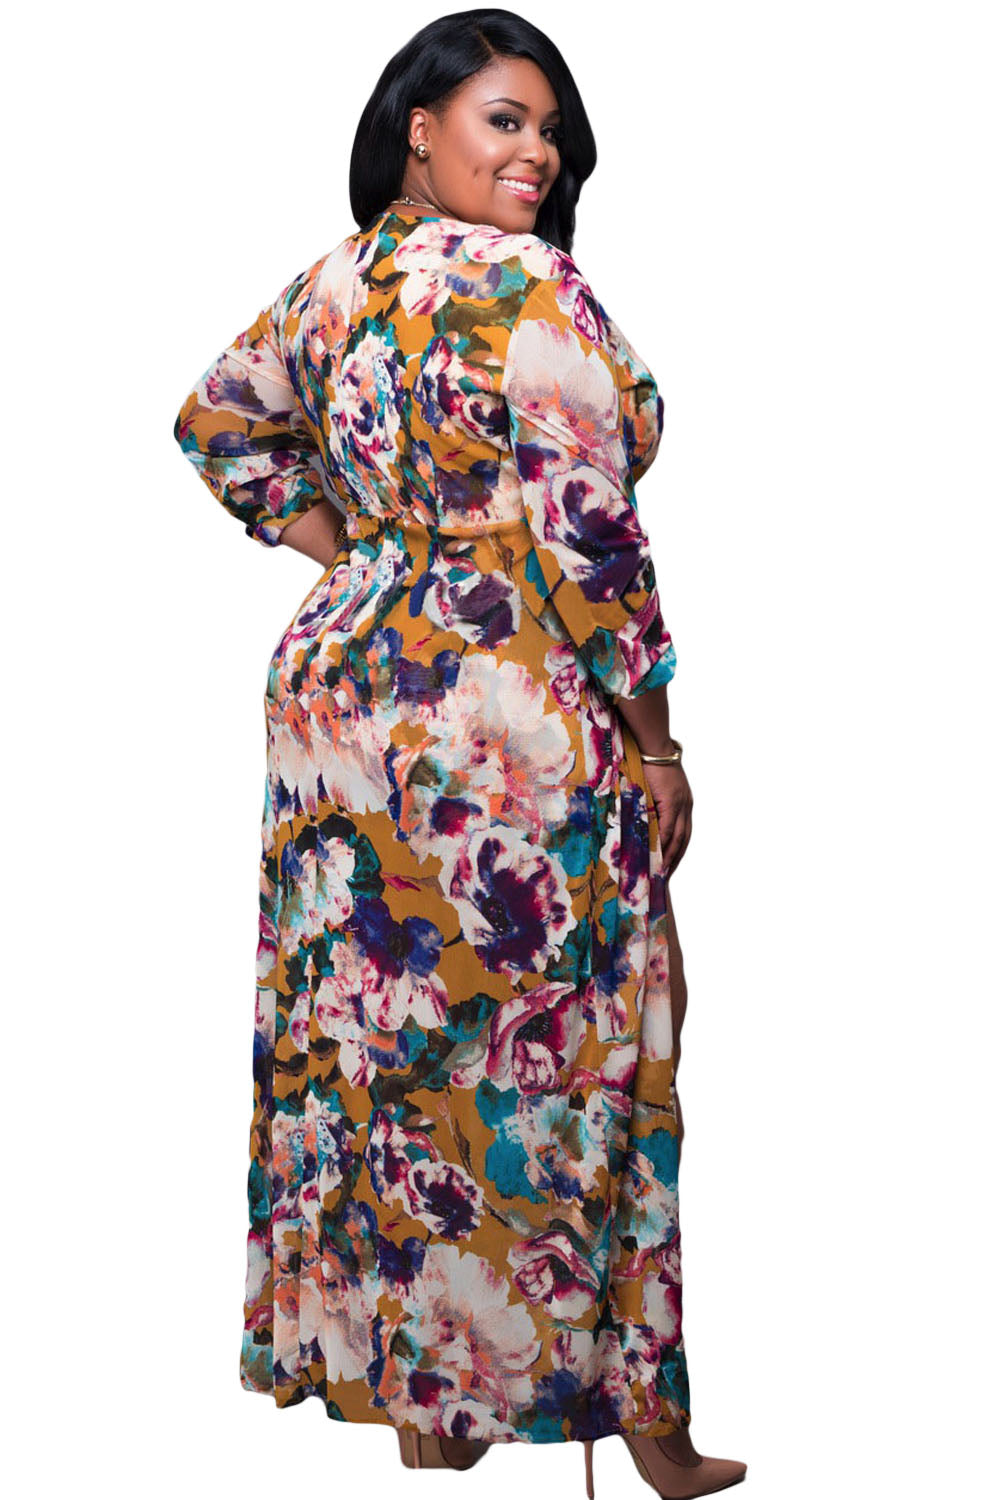 Sexy Plus Size Sleeved Floral Romper Maxi Dress – SEXY AFFORDABLE CLOTHING